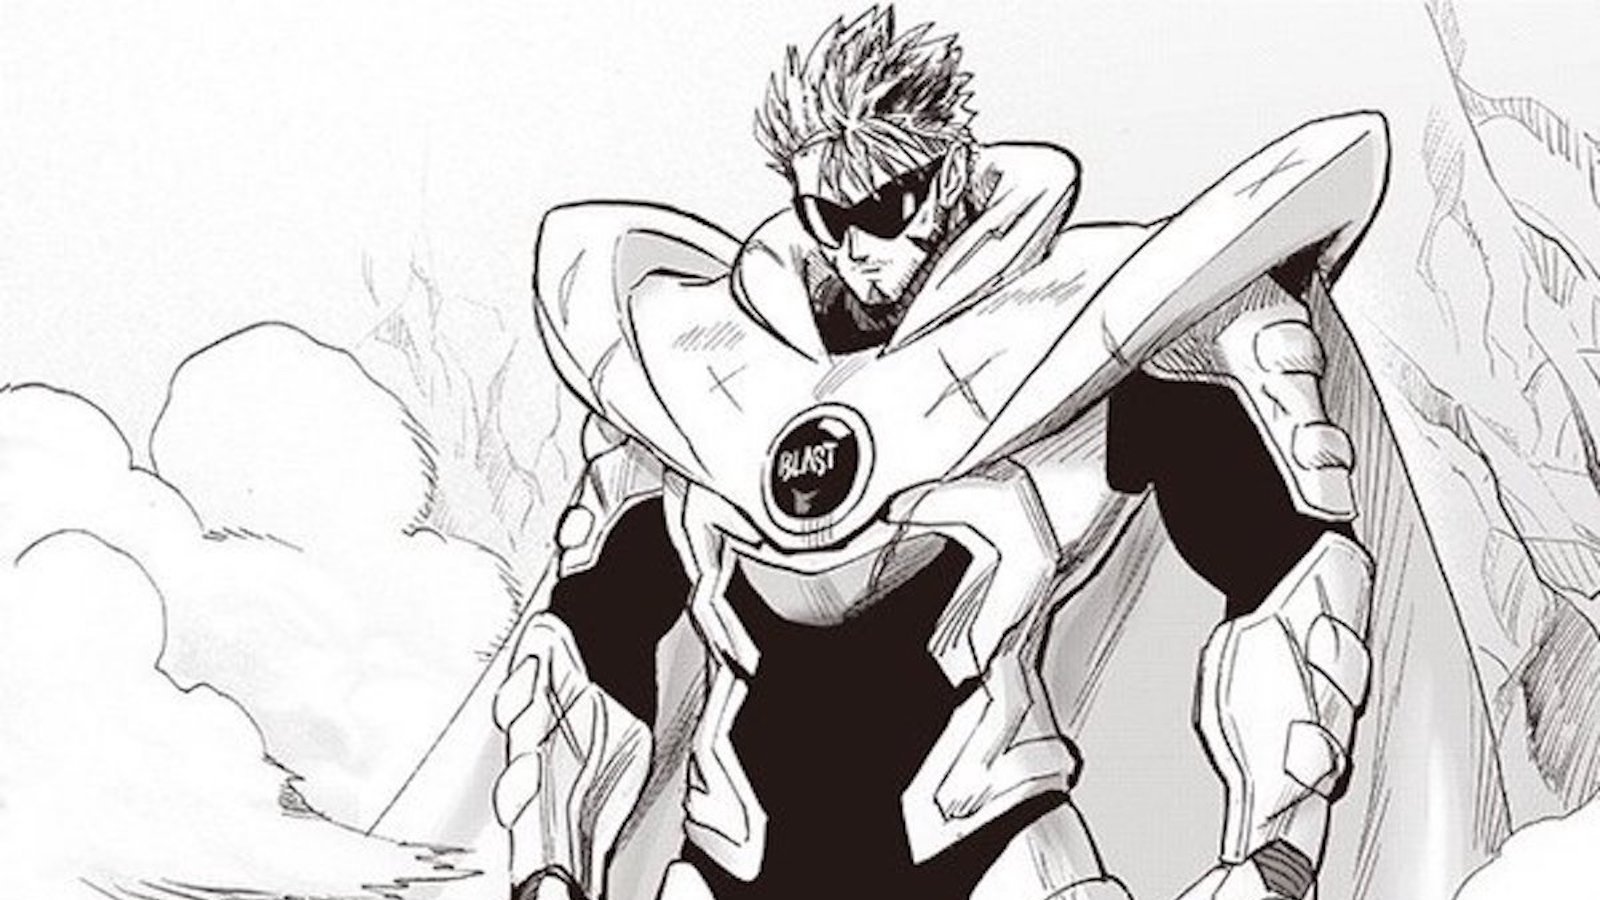 Who are the most powerful characters in One Punch Man? - Quora